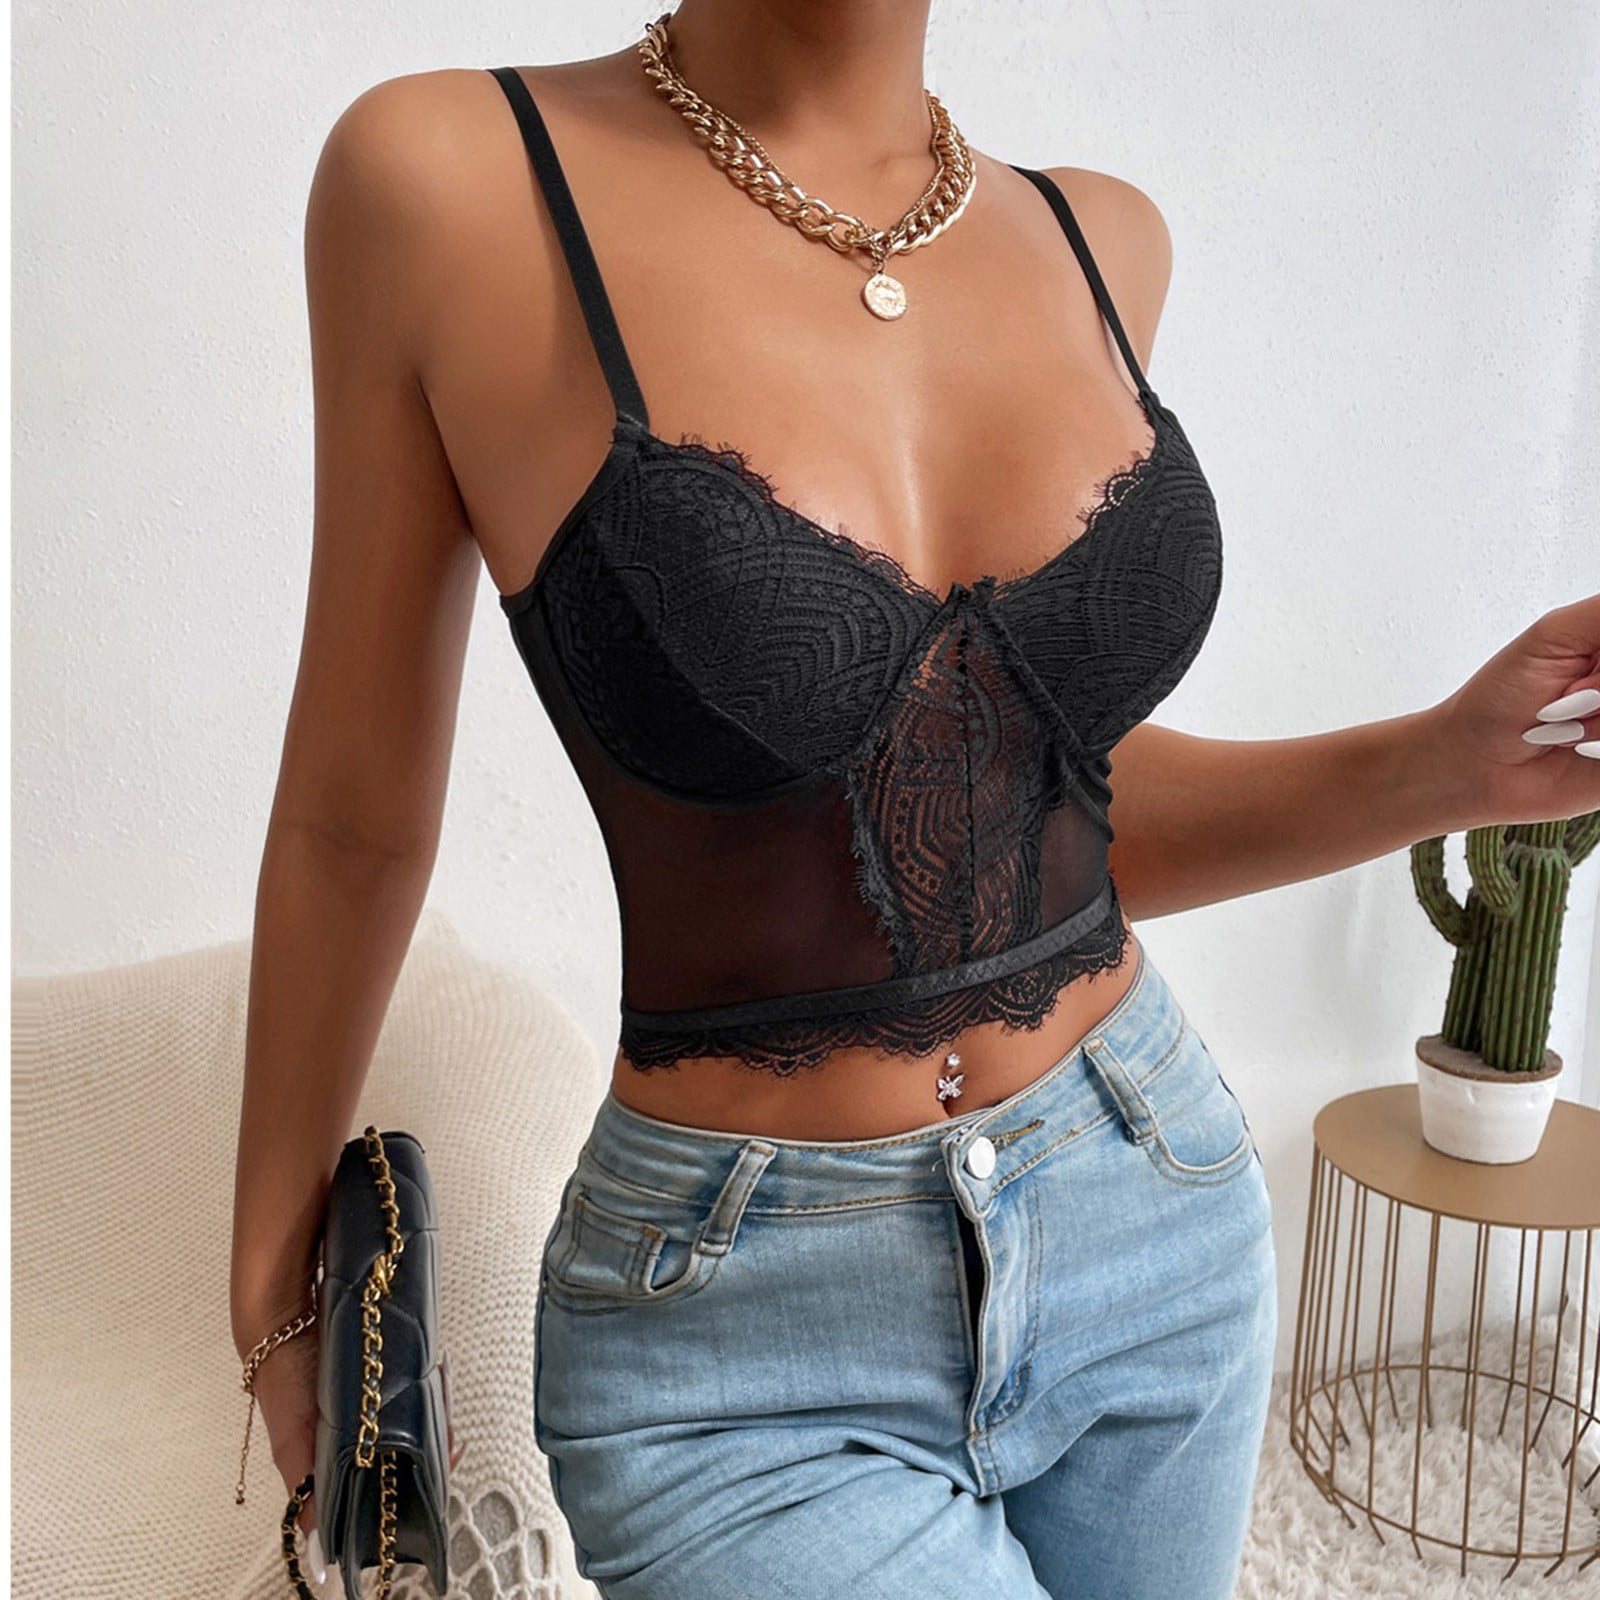 Baycosin Tank Top With Built In Bra For Women Summer Satin Crop Top  Backless Corset Top Night Club Party Bustier Top